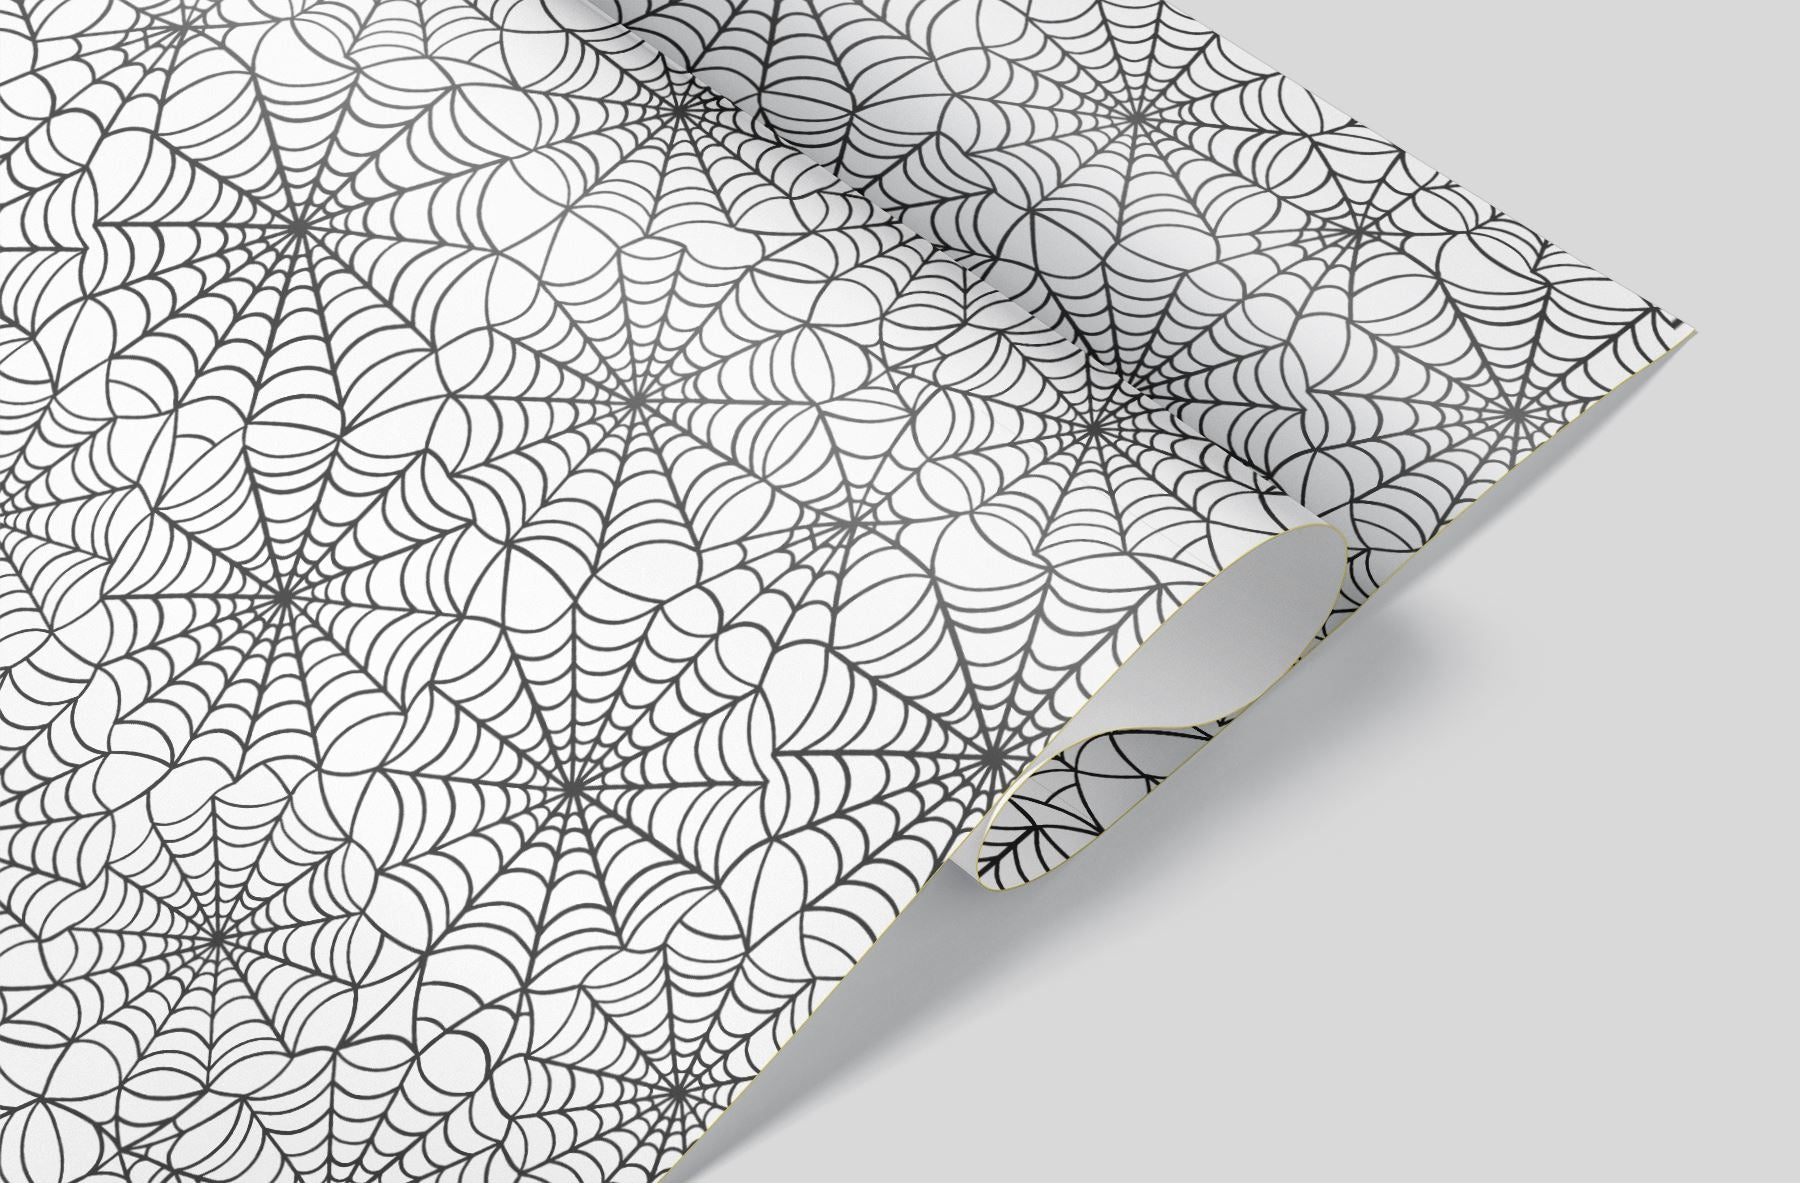 Giant Spider Webs Wrapping Paper Alexander's 